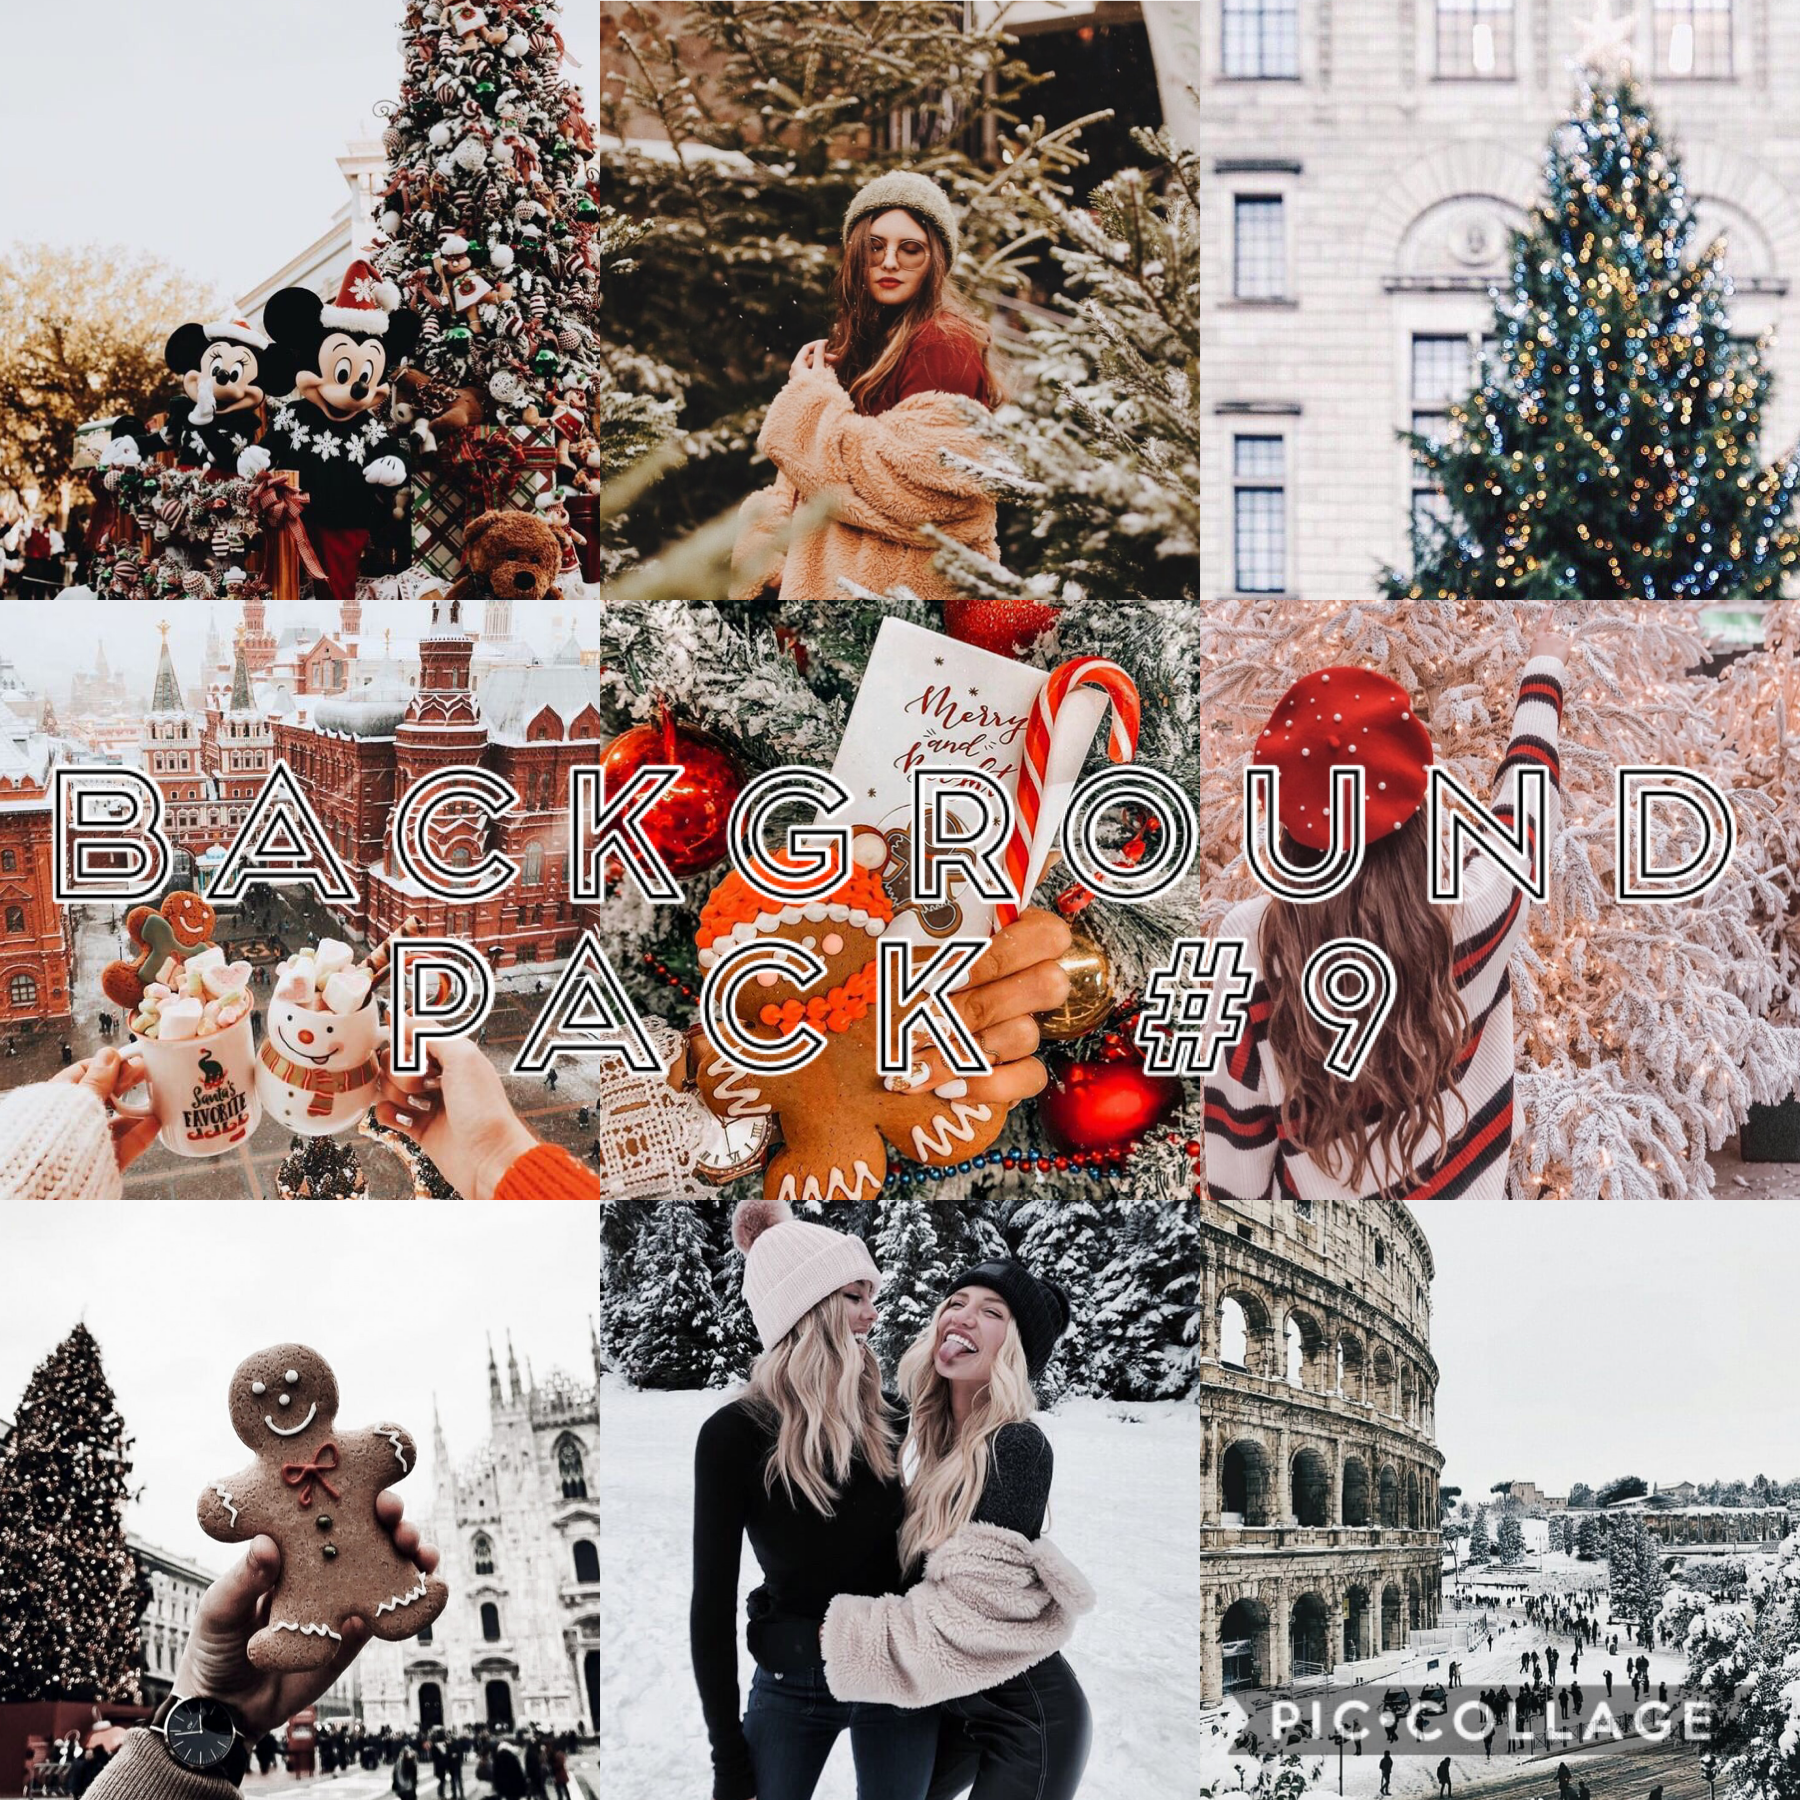 12/16/19 | Christmas/winter pics! Starting to use Pinterest again so follow me if you want @Awesome_Bunny. Check remixes as always 🎄